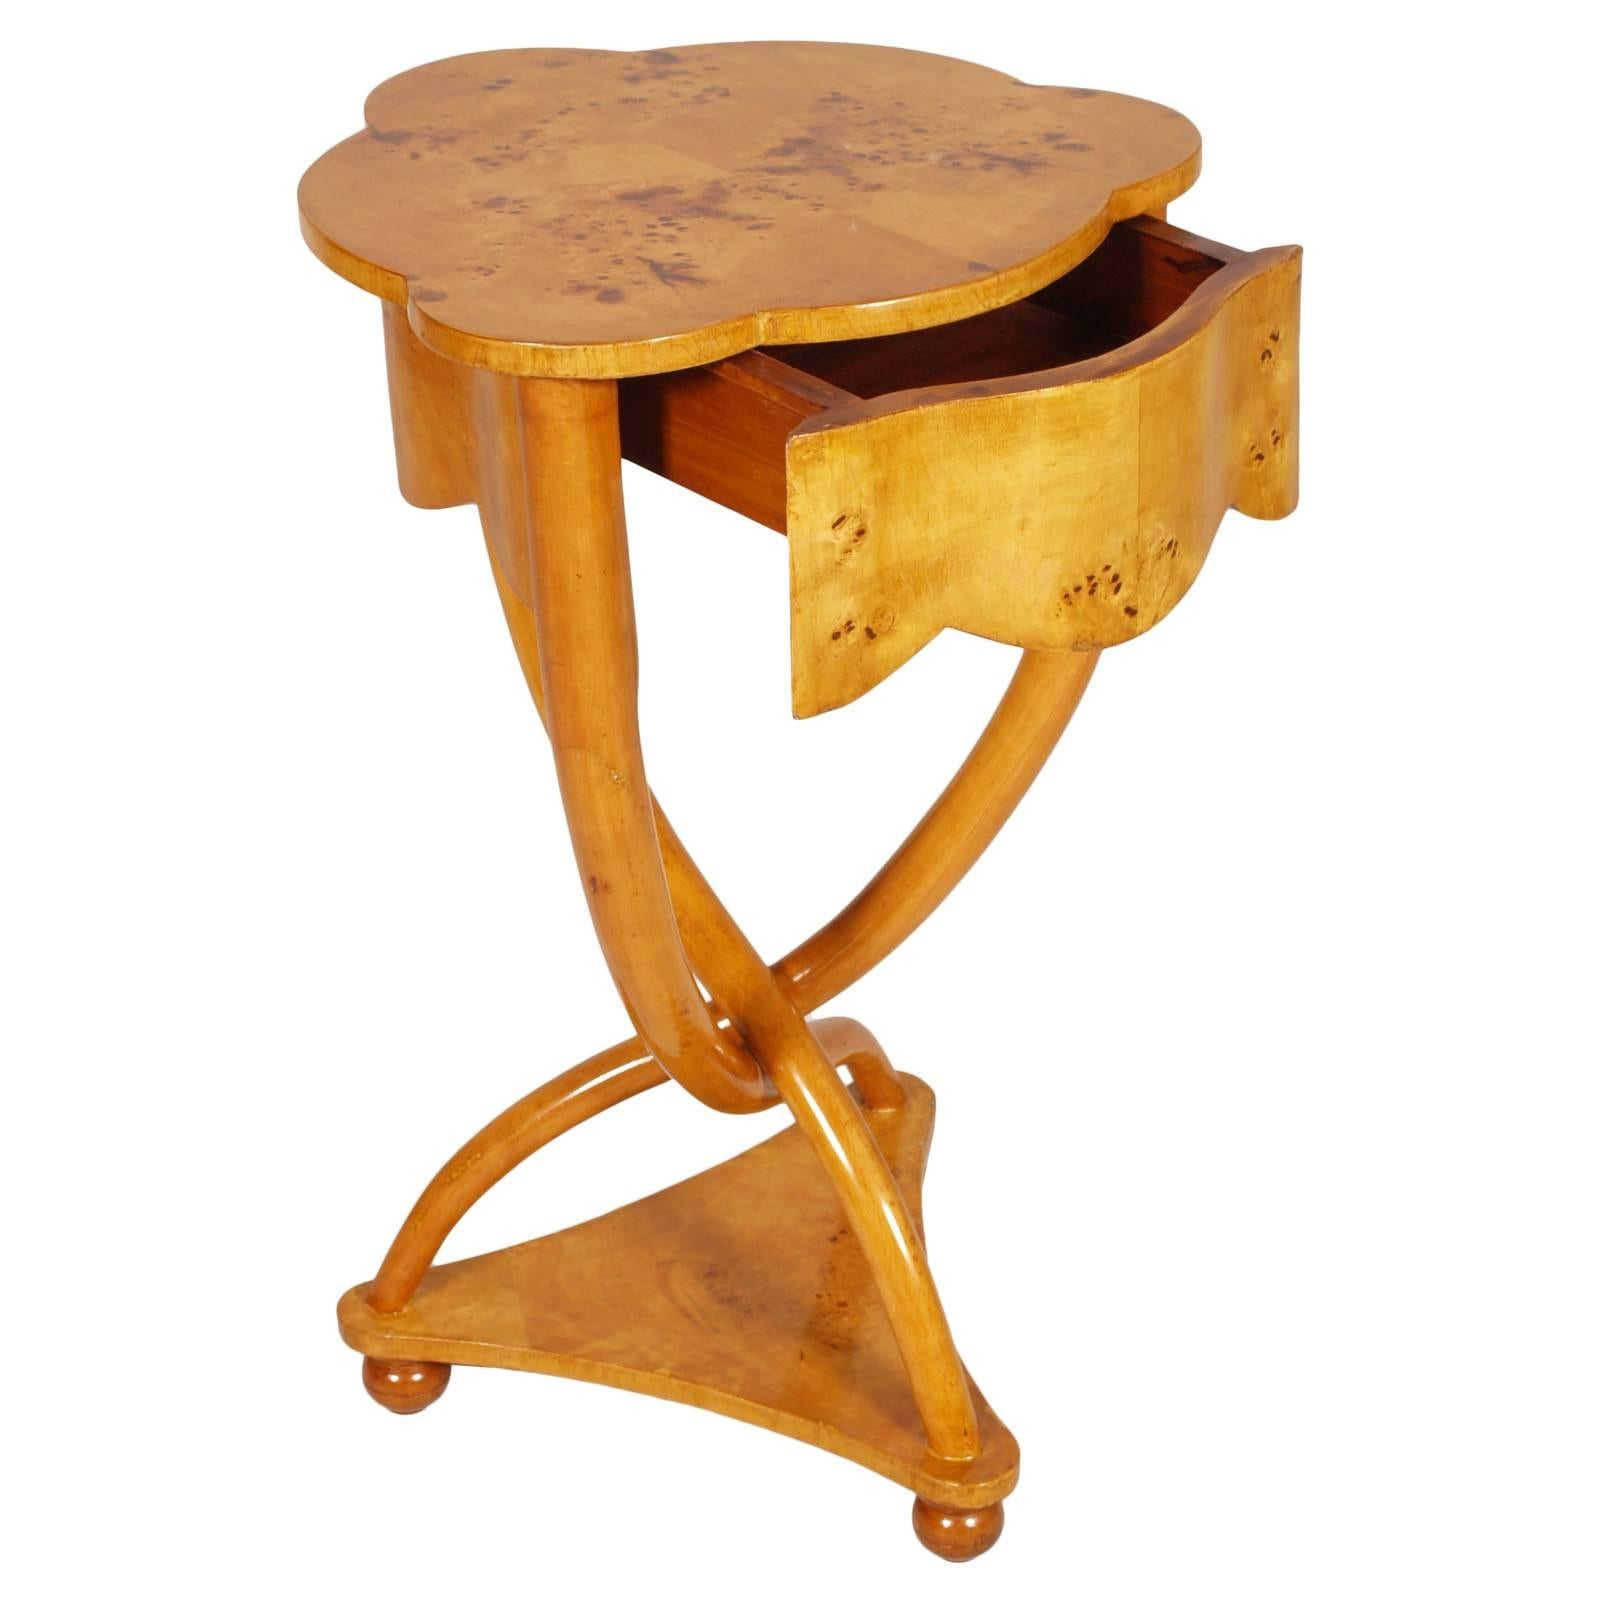 Italian Art Deco Vittorio Dassi attributed sculptural uncommon bedside table or corner console, in lacquered birch root
Measures cm: H 72, W 44, D 44.